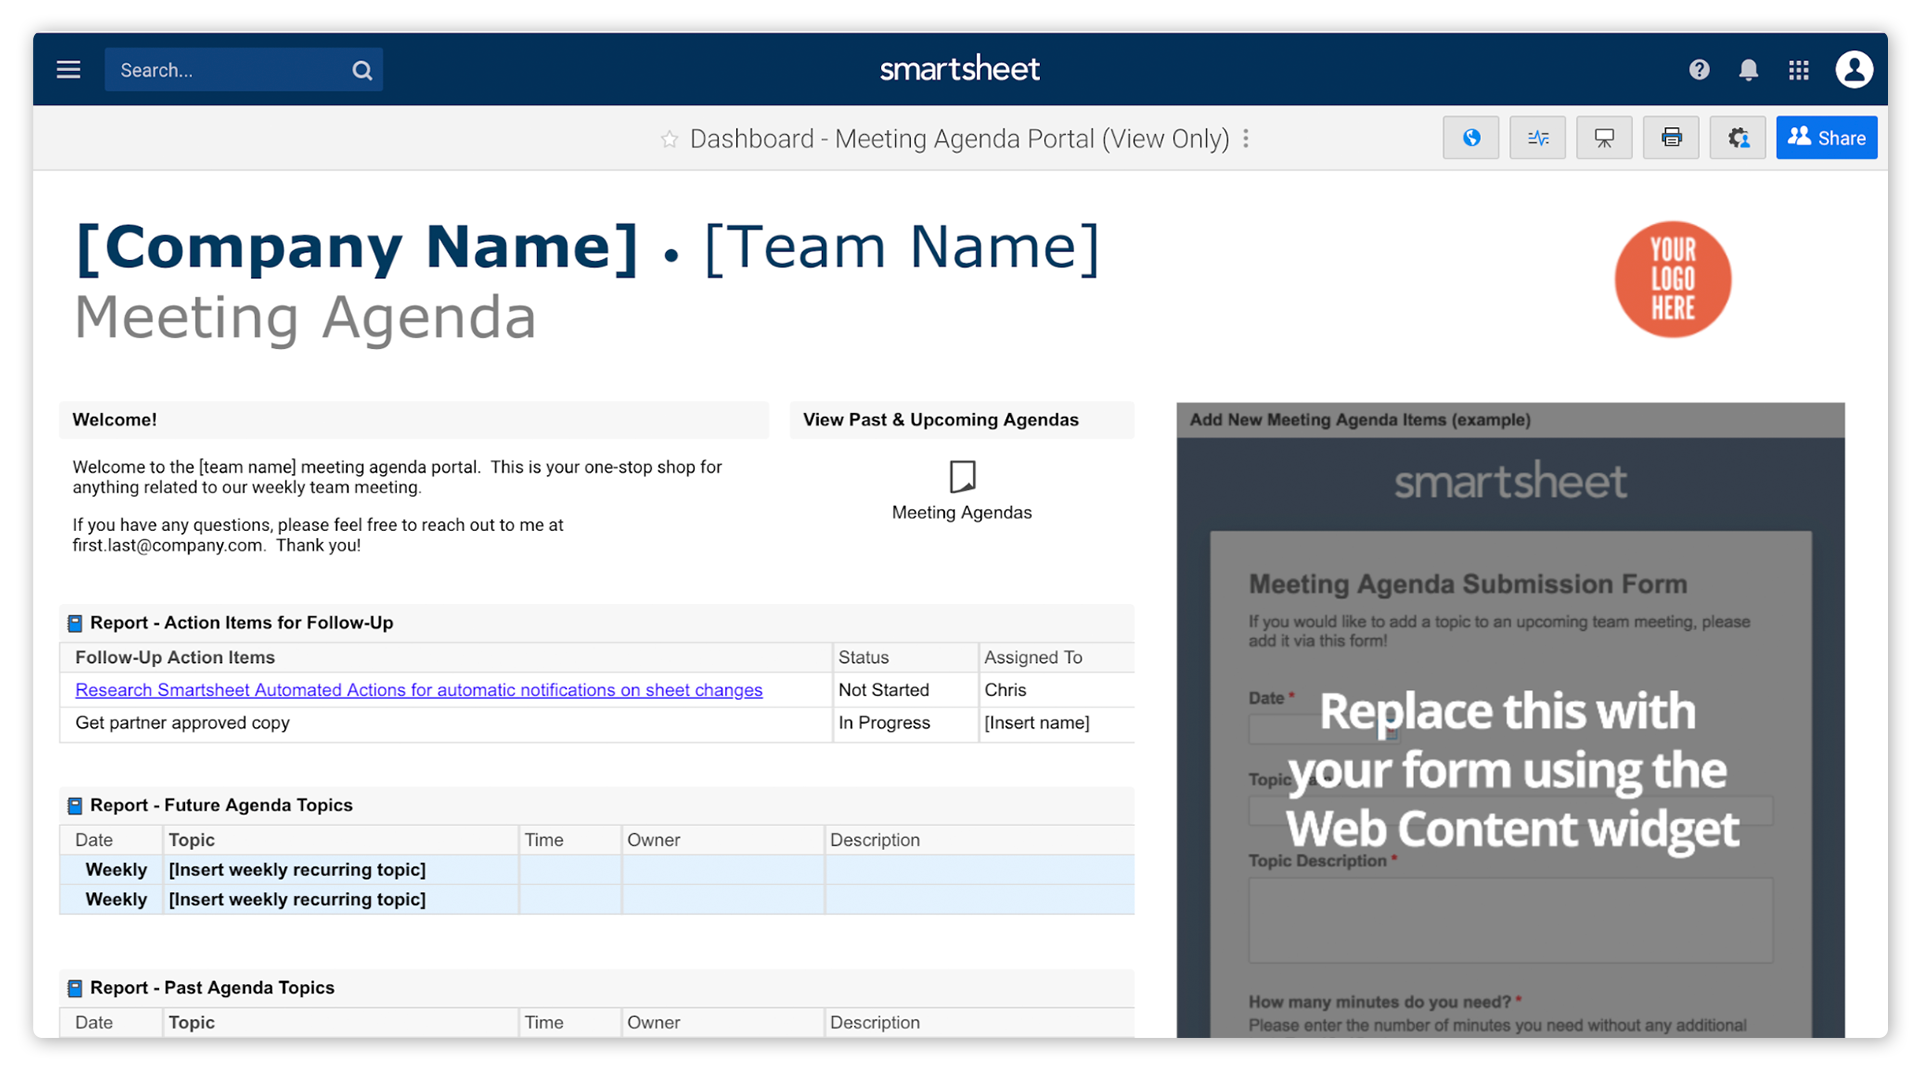 A Smartsheet dashboard appears on the screen as a customizable template for a meeting agenda and other meeting components